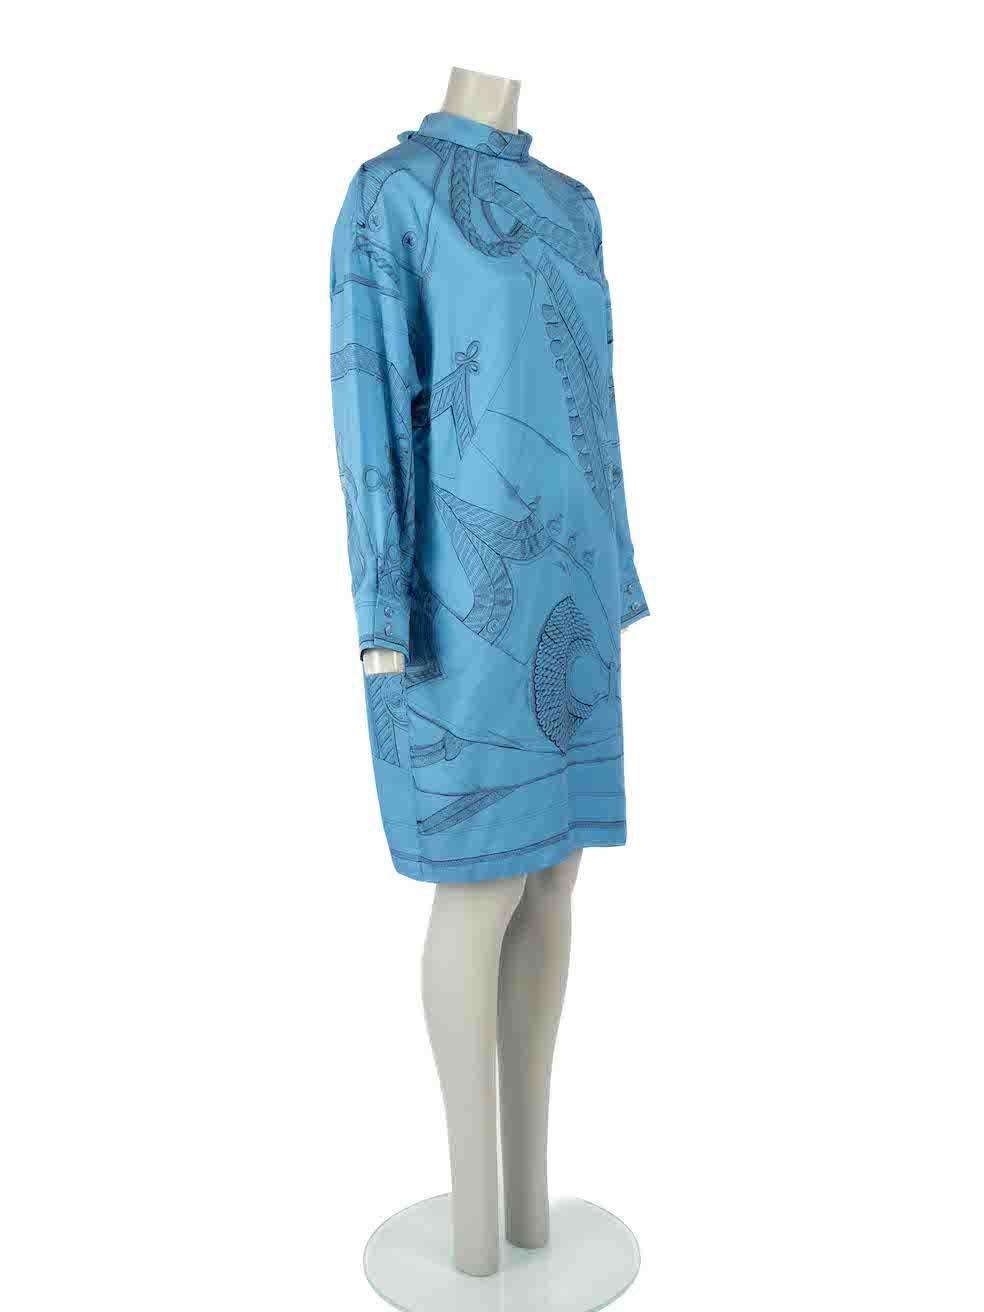 CONDITION is Very good. Minimal wear to dress is evident. Minimal wear to the interior with some discolouration seen inside the neck on this used Hermès designer resale item.
 
Details
Blue
Silk
Dress
Patterned
Long sleeves
Round back tie neck
Knee